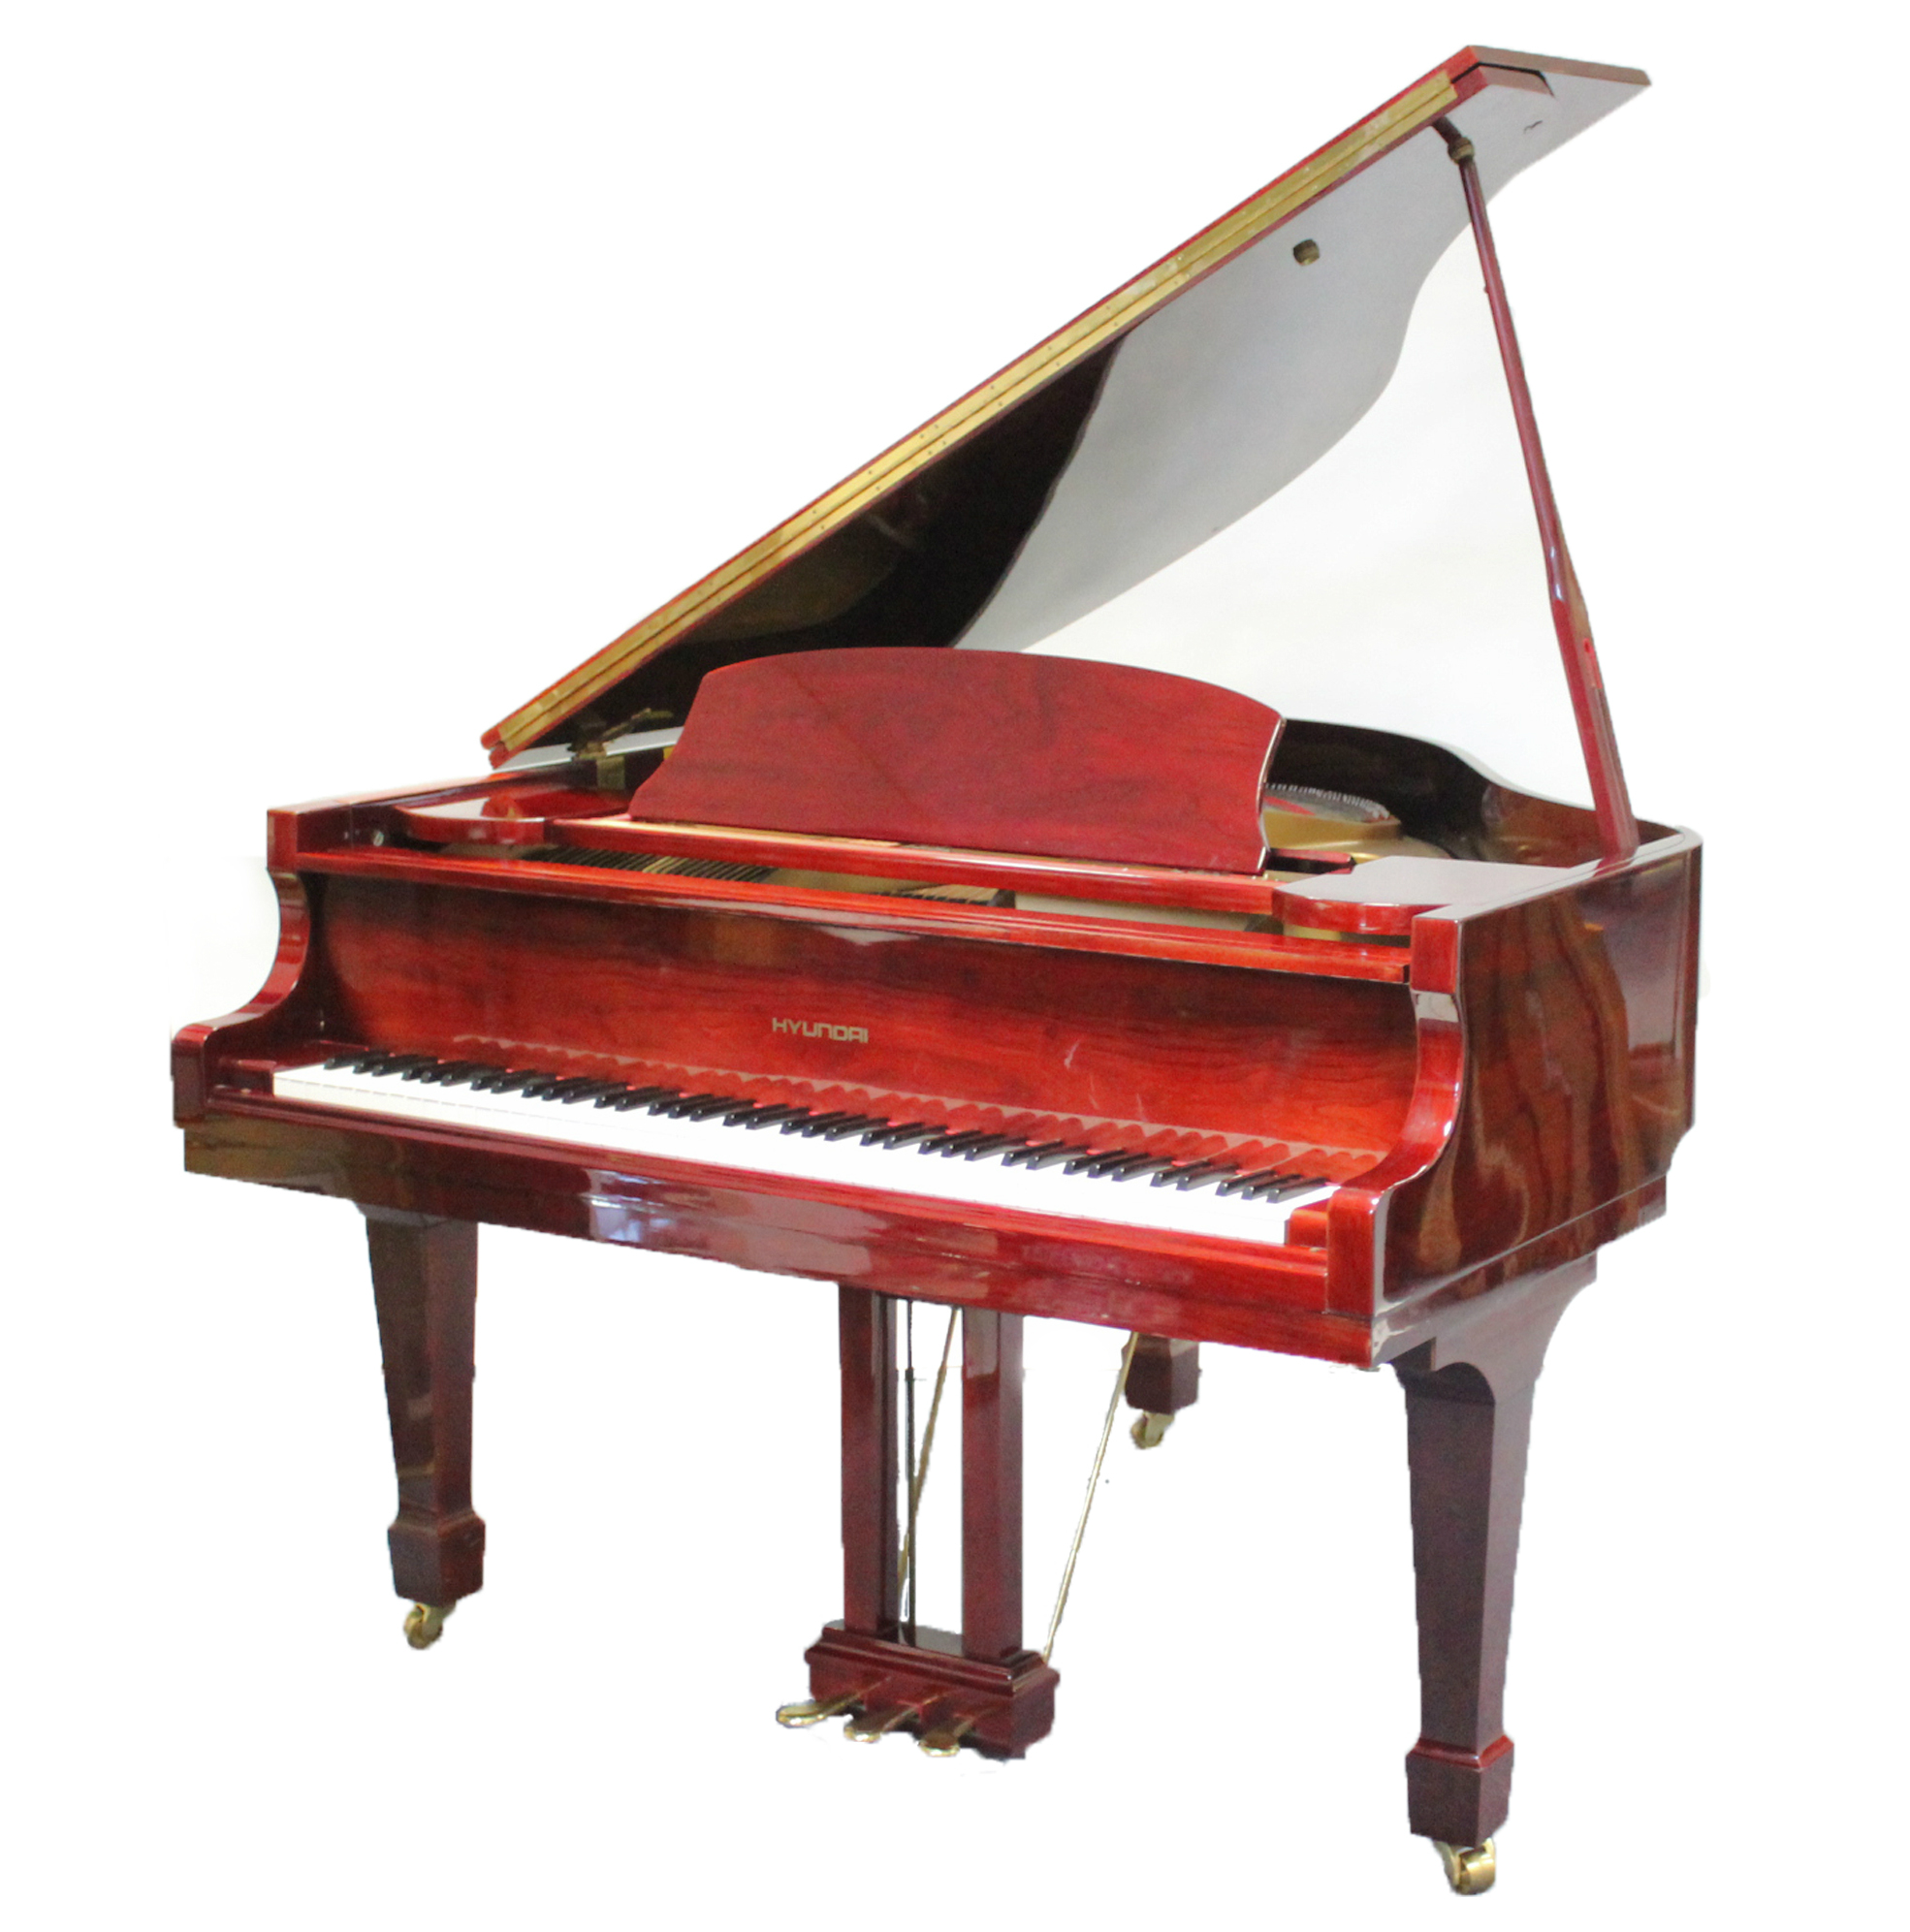 A HYUNDAI BABY GRAND PIANO with over-strung iron frame, model G-80A, No. 8707550, in rosewood case